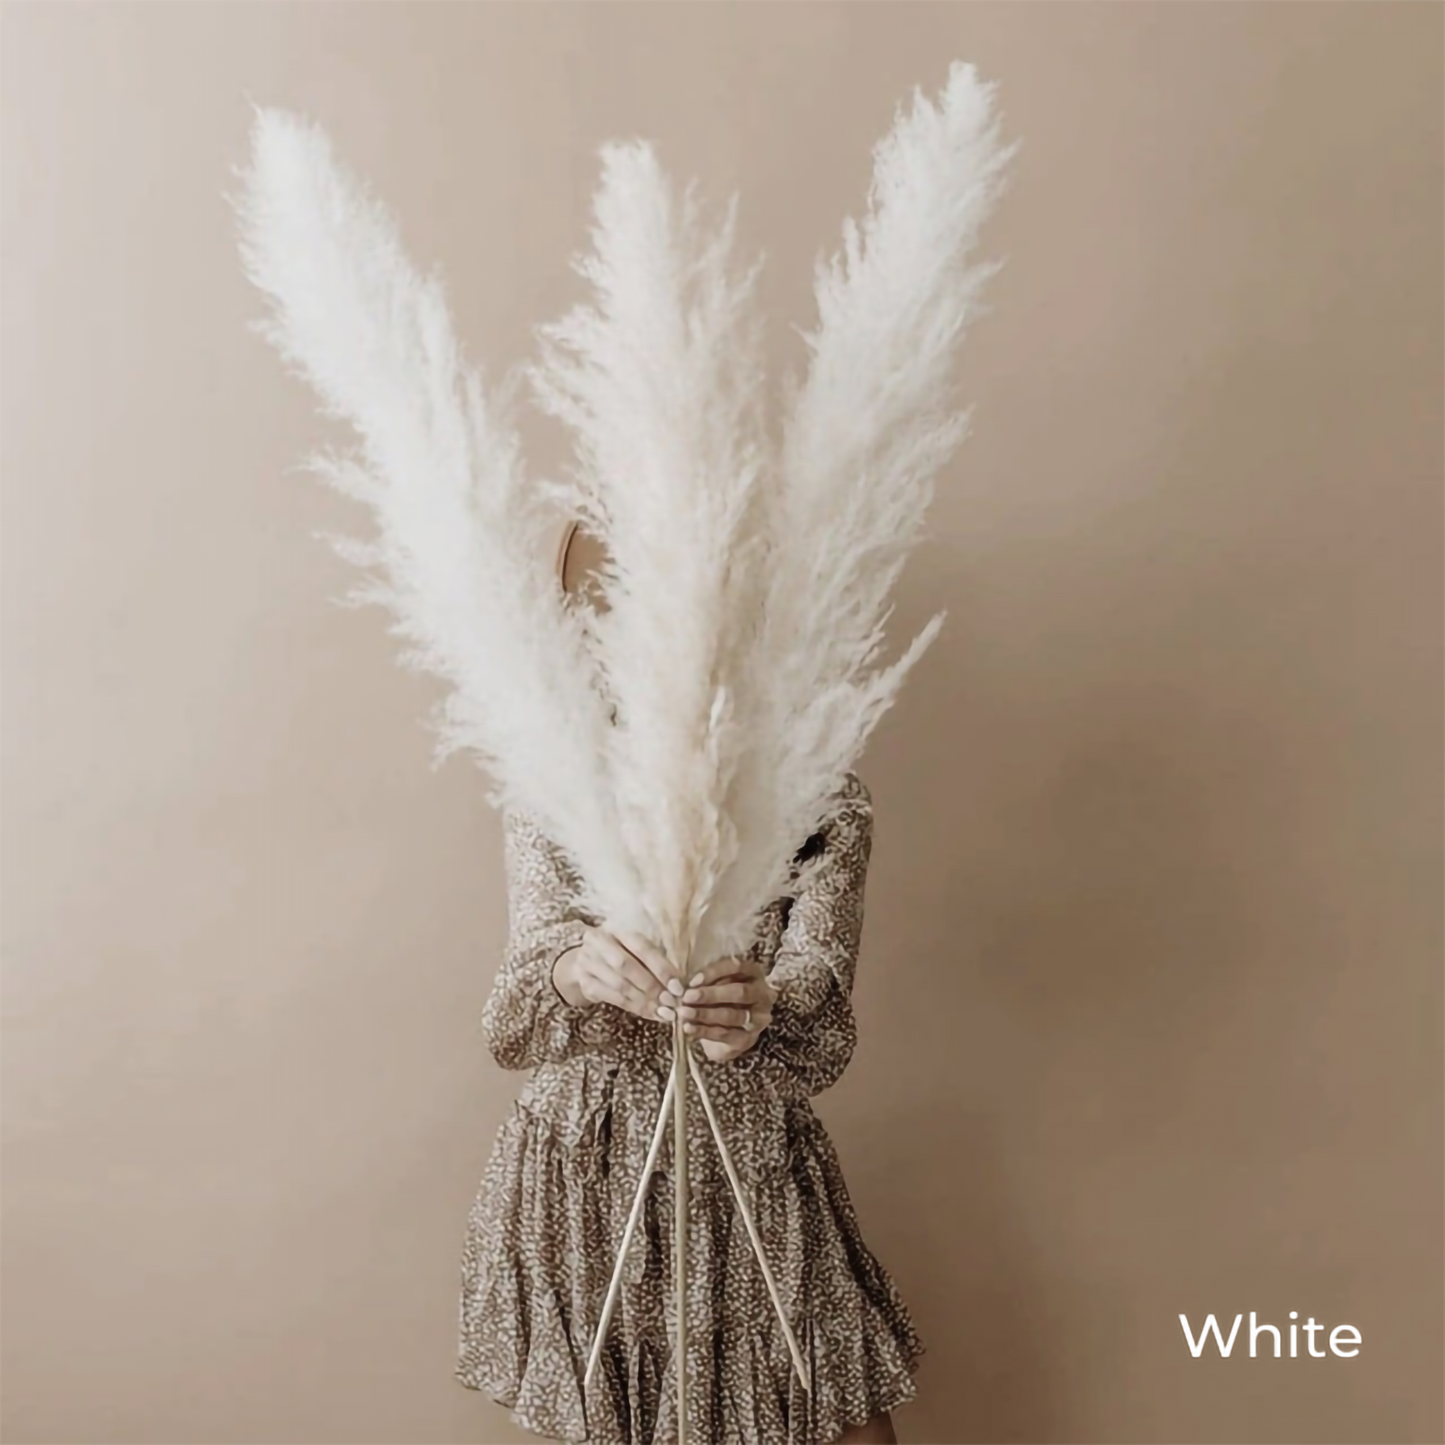 80 - 130 cm Natural Real Big Dried Pampas Grass Bouquet (White / Beige / Gray), Fluffy Feather For Modern Boho Home Decoration Ornament Besontique